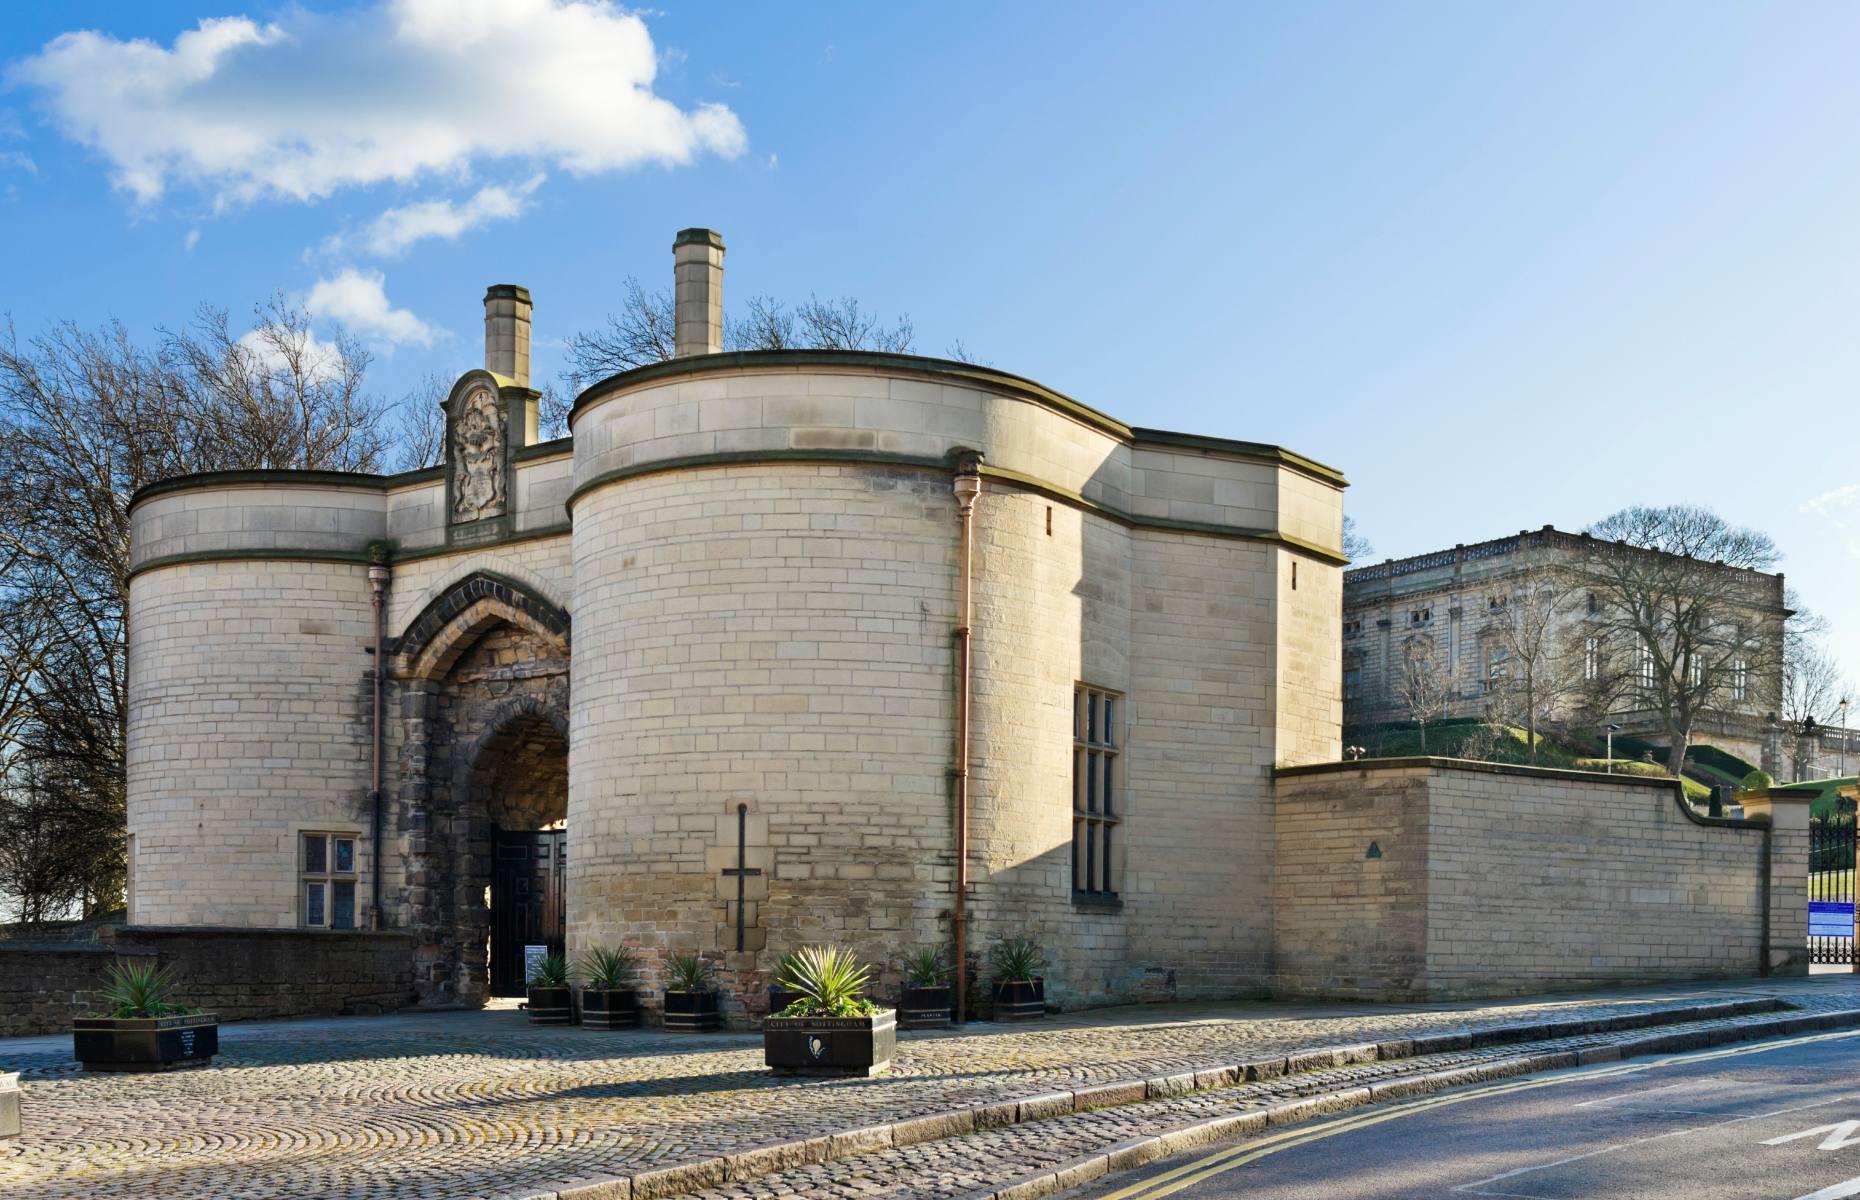 <p>Nottingham Castle reopened in 2021 after a £30 million project that included the creation of a Robin Hood experience and visitor centre, landscaping of the castle grounds and refurbishment of the galleries in the Ducal Palace. Although the medieval castle has long since been demolished, its walls and gates remain – the gatehouse (pictured) was renovated in Victorian times. Nottingham Castle has a fascinating history, from the Norman Conquest and the legends of Robin Hood to the Civil War and Industrial Revolution.</p>